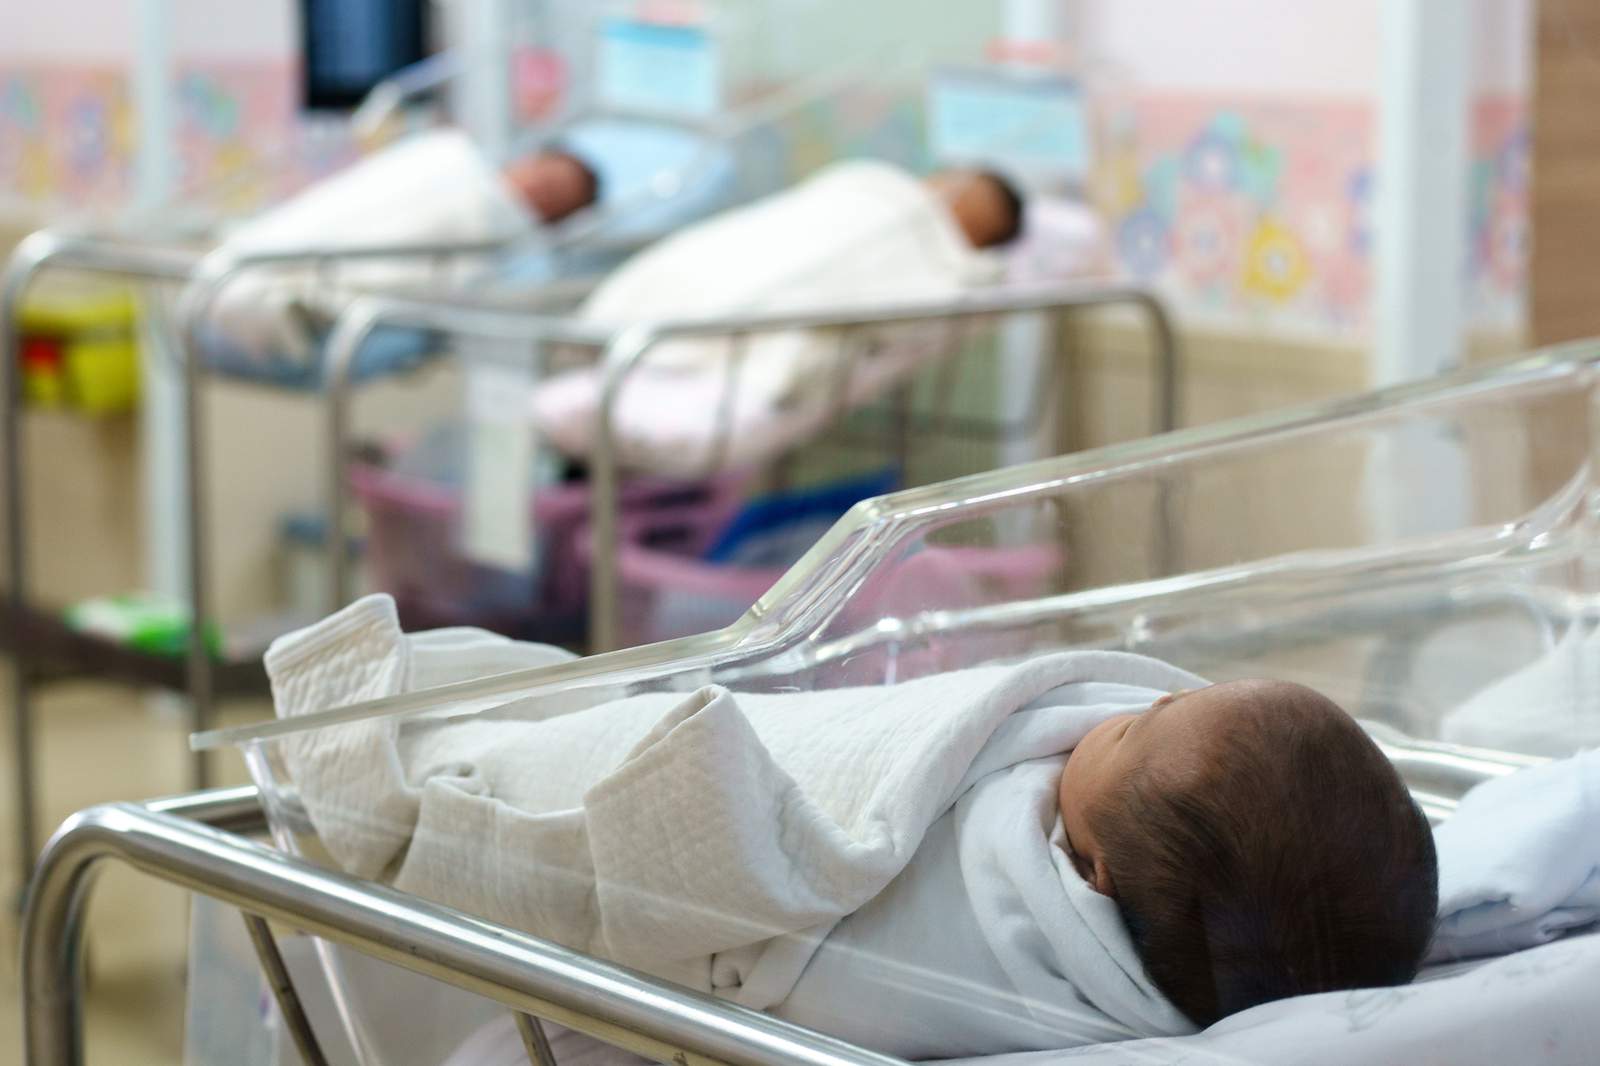 Baby bust: Pandemic takes toll on U.S. birth rate